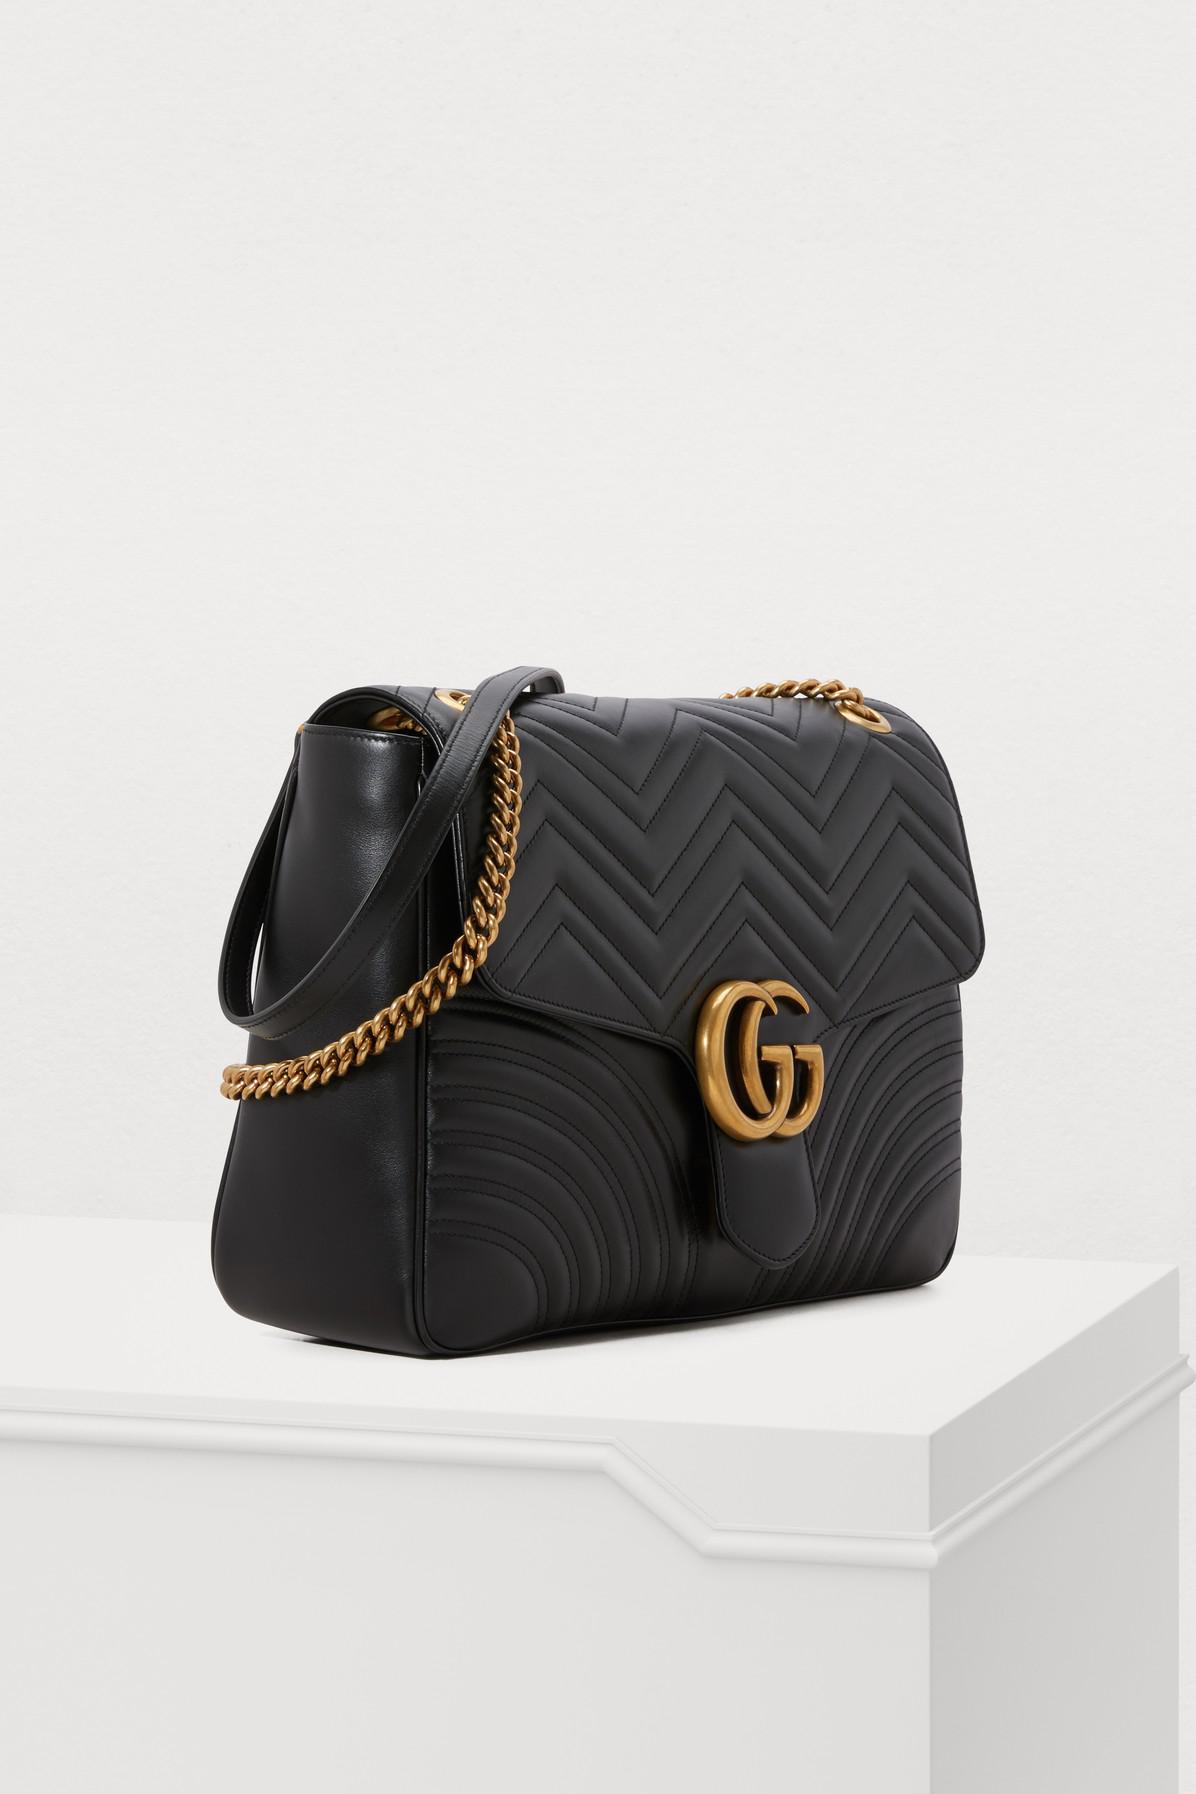 Gucci Leather Borsa Marmont Bag in Black - Lyst